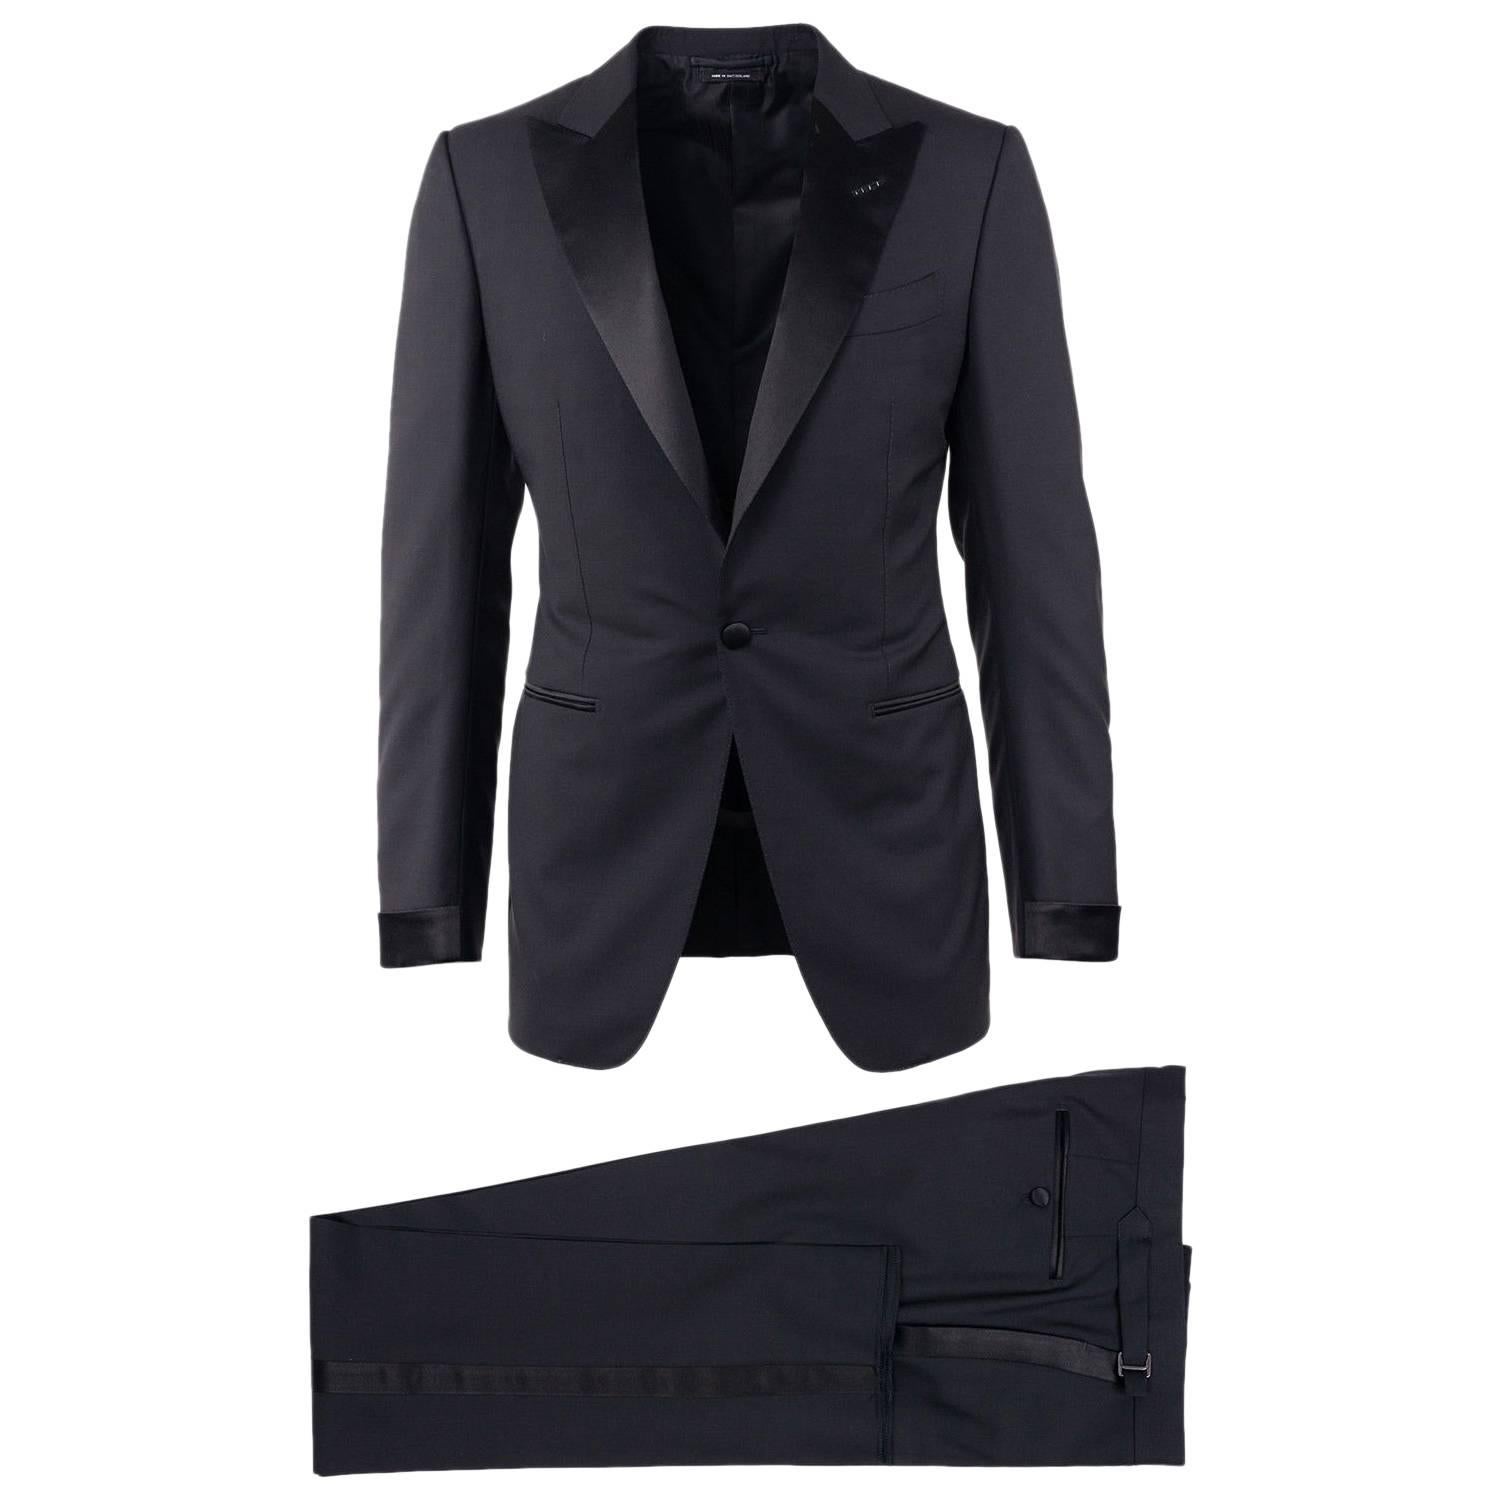  Tom Ford Black Wool Satin Lapel O 039 Connor Two Piece Tuxedo For Sale